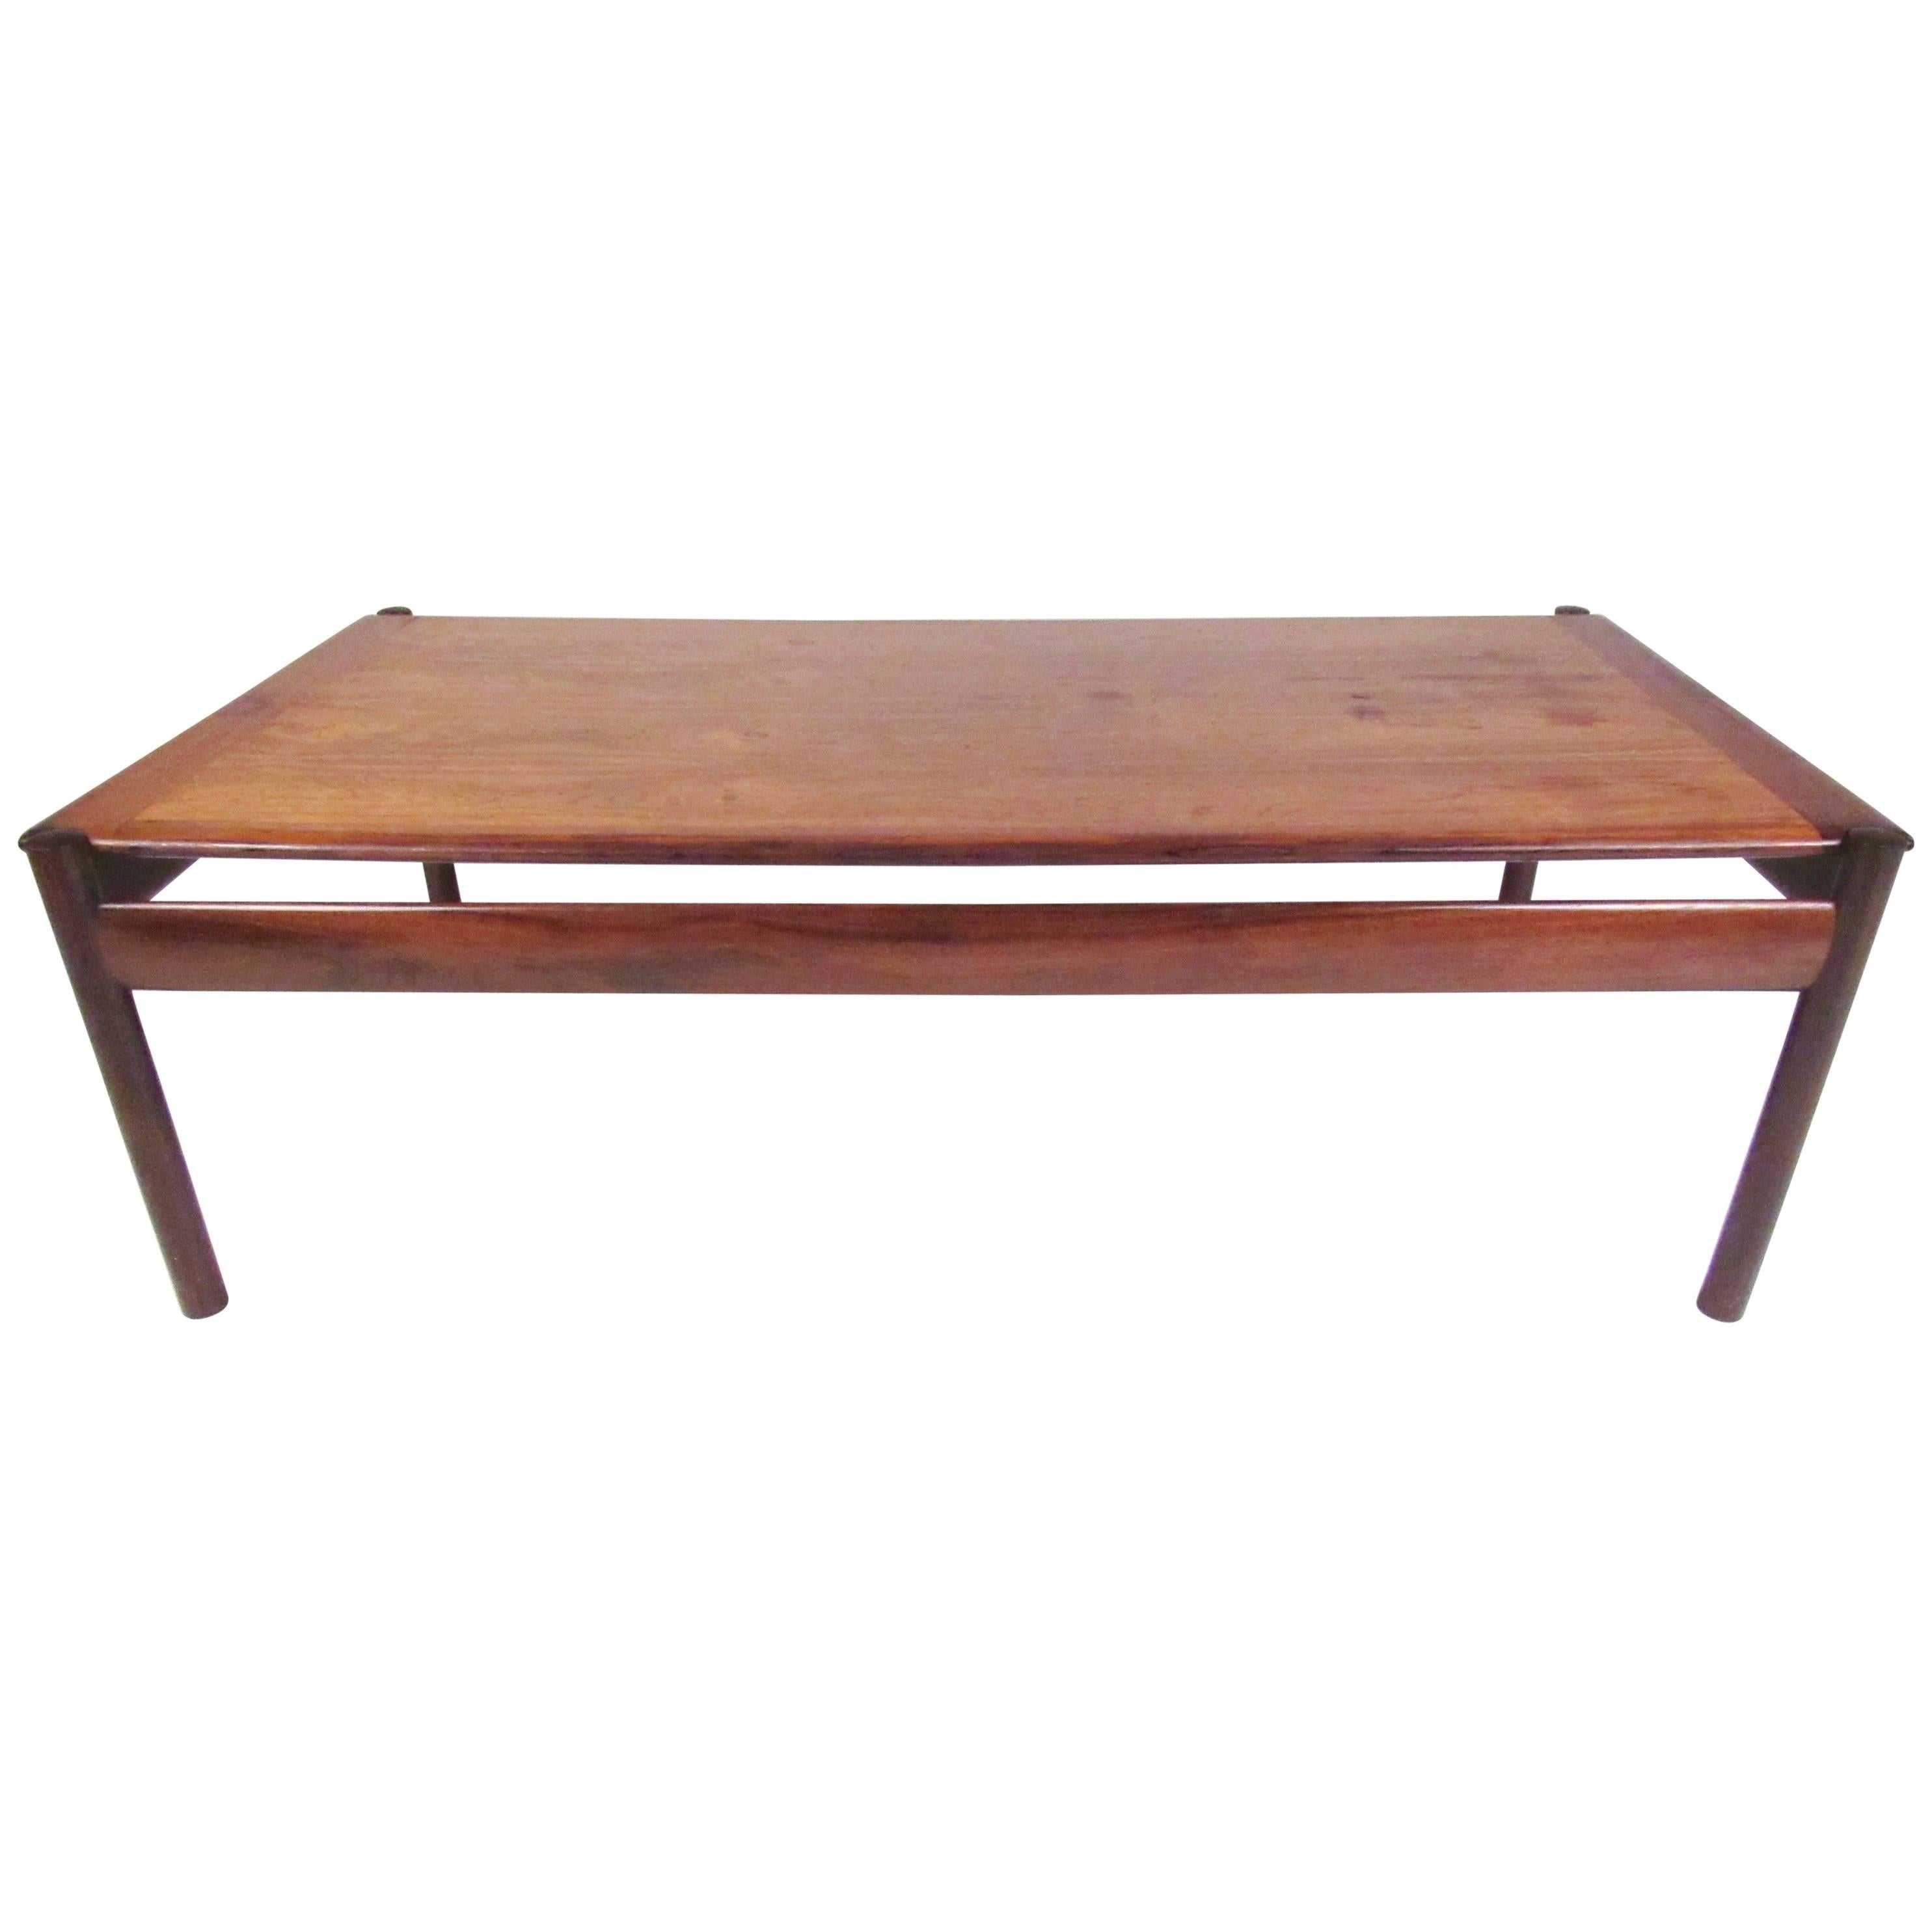 Mid-Century Modern Rosewood Coffee Table by Sven Ivar Dysthe